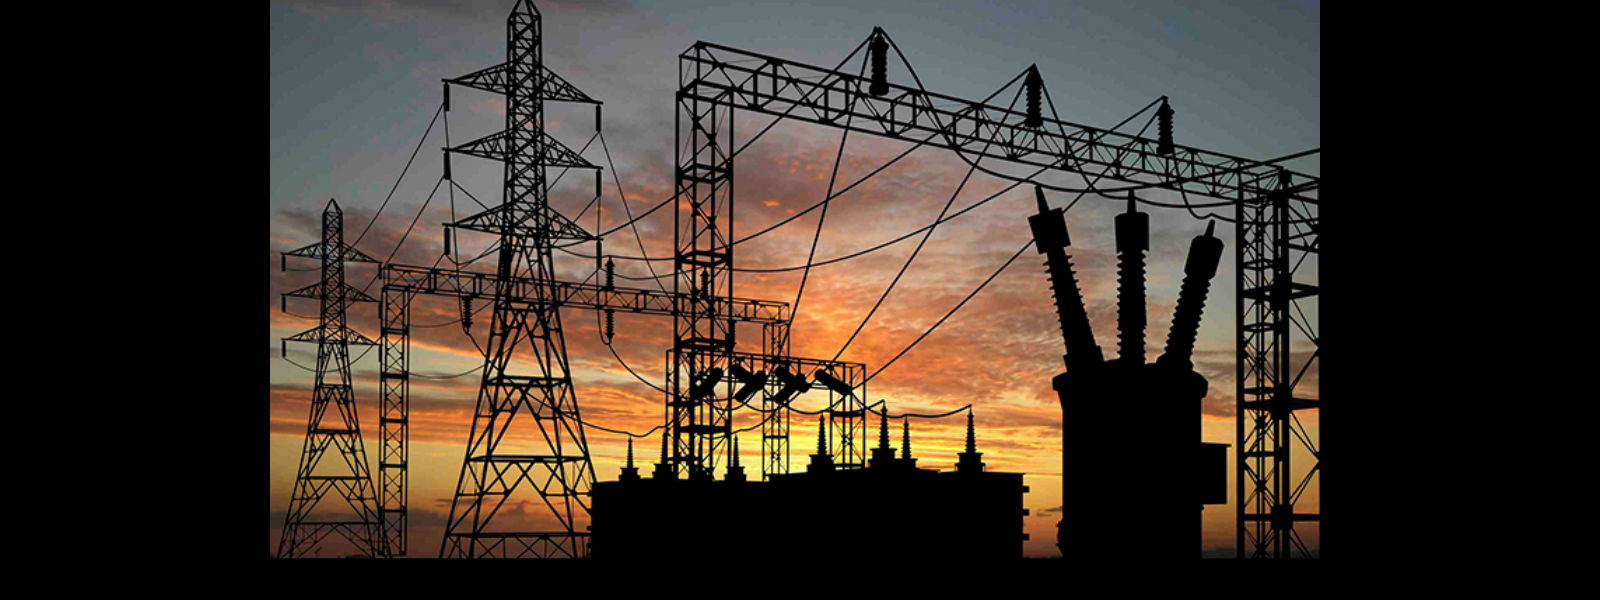 Govt. to construct 3 new power plants